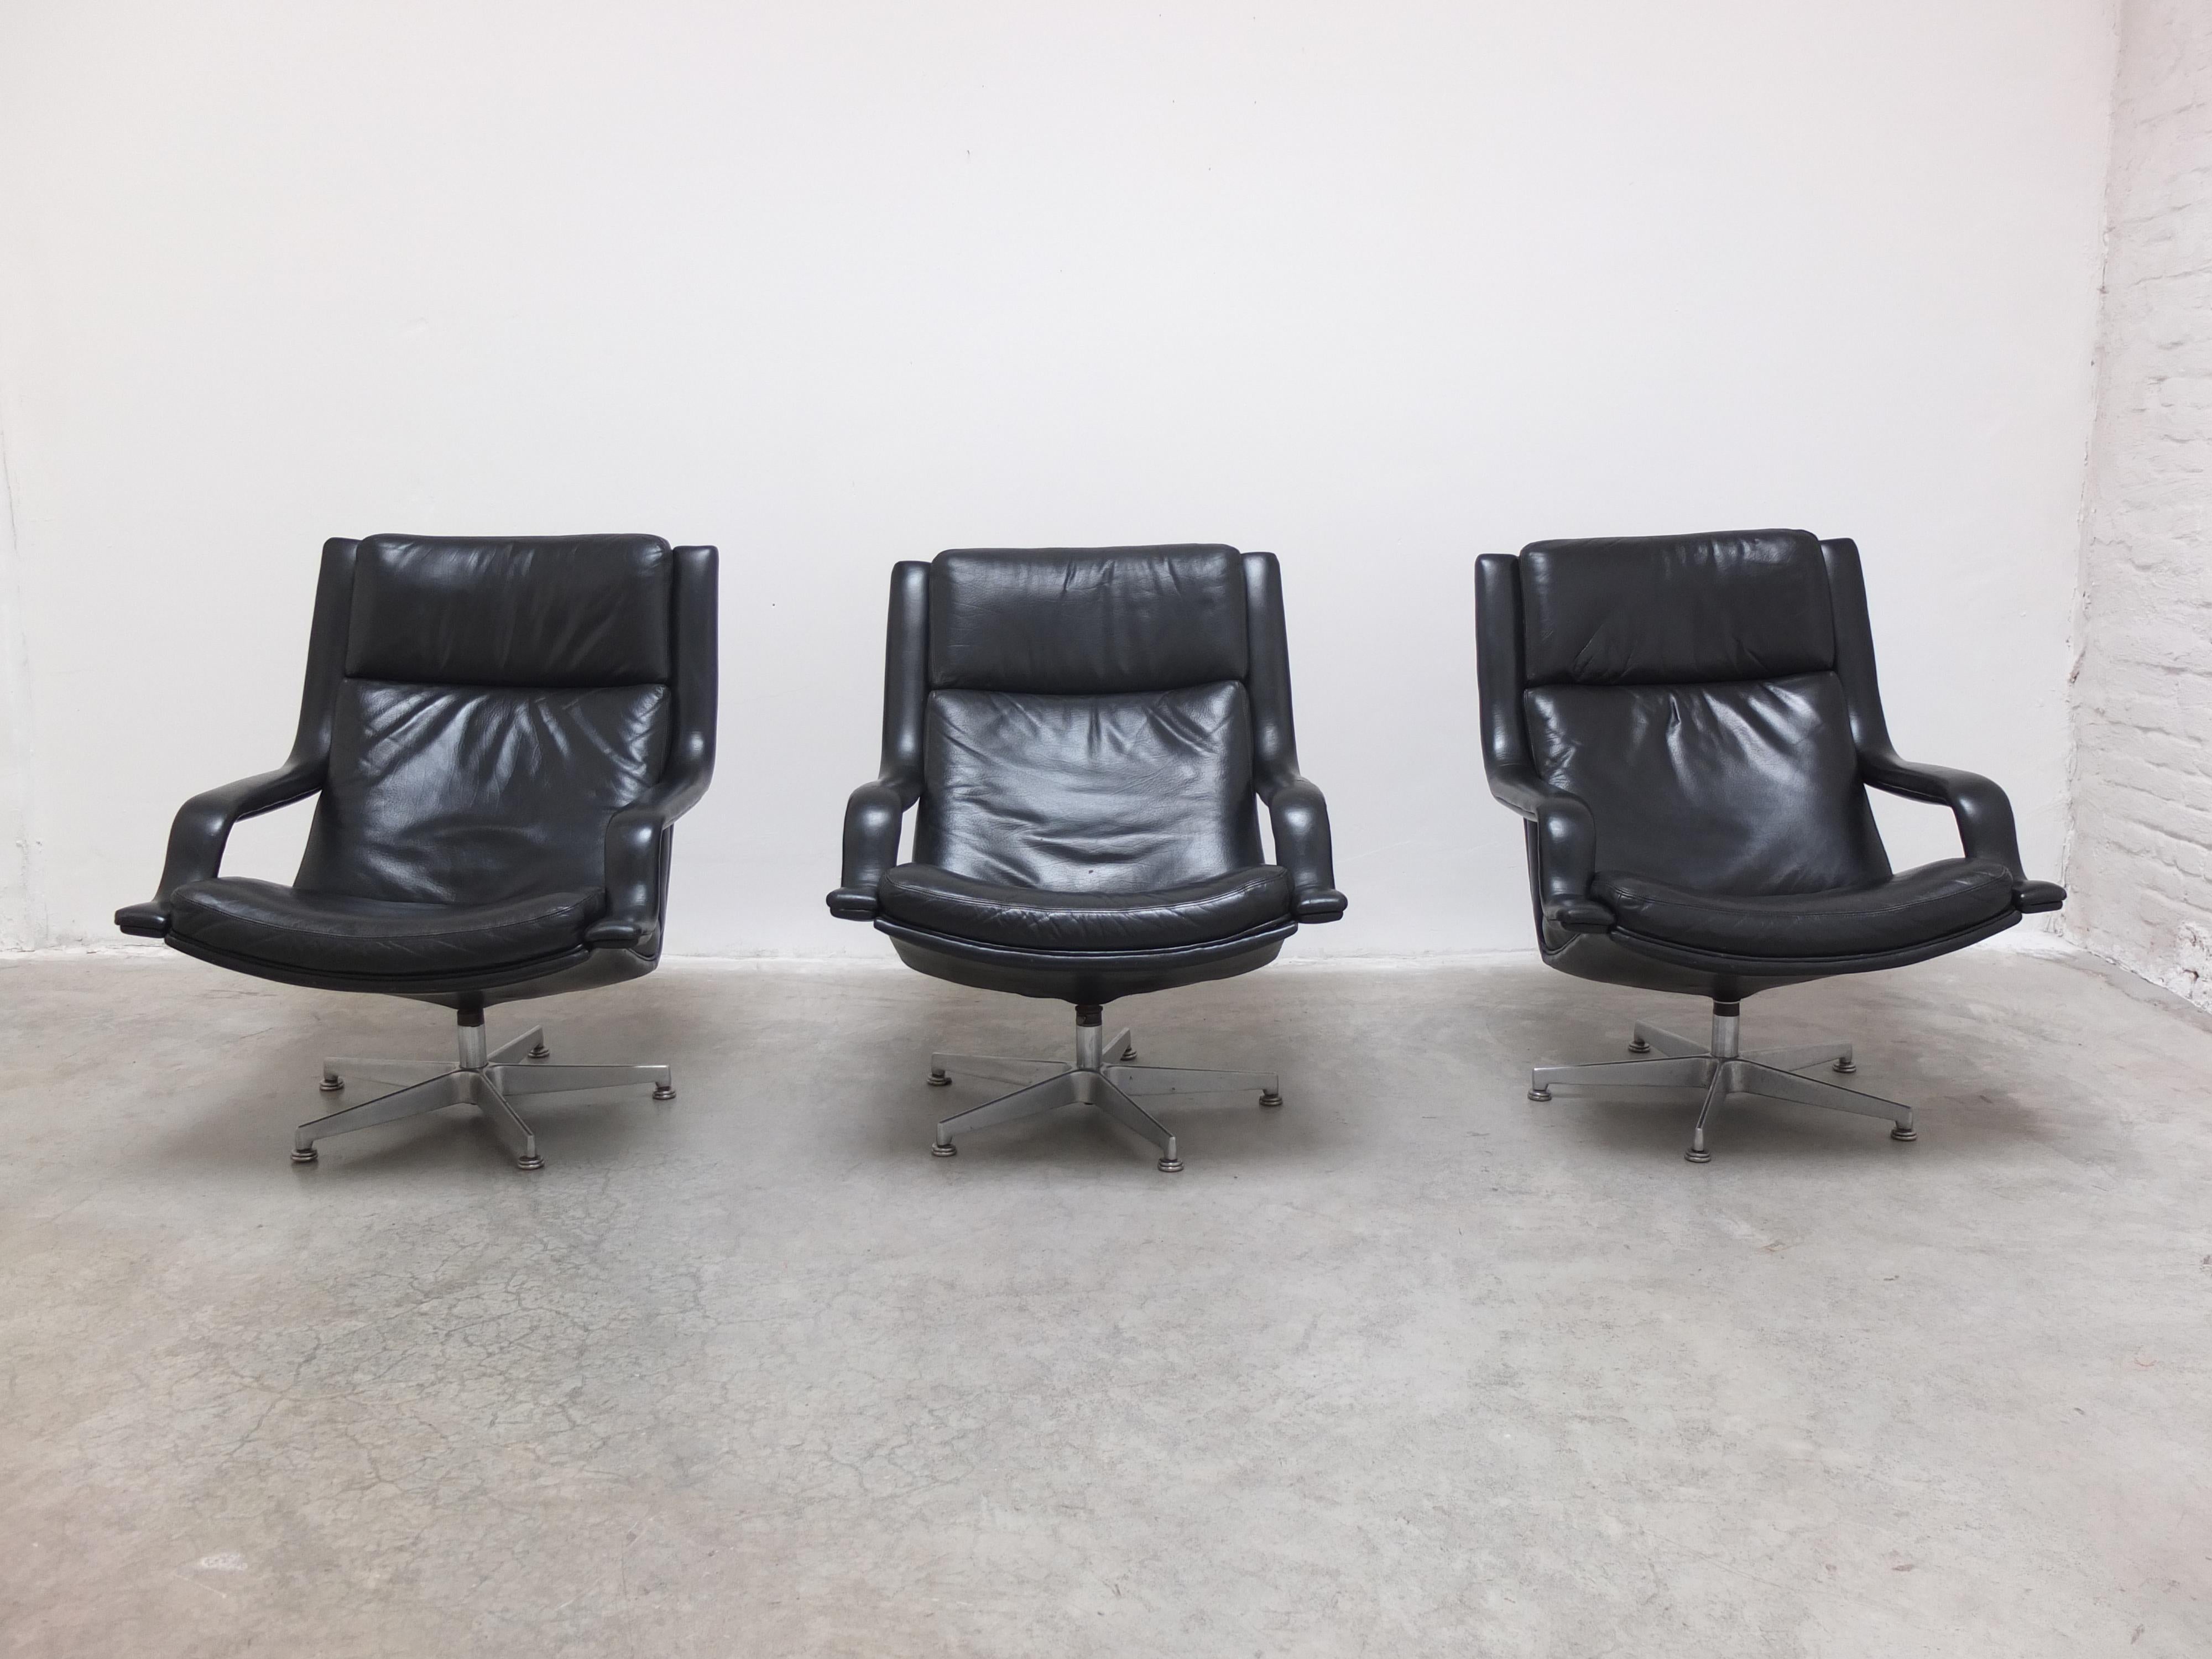 Iconic ‘F152’ swivel lounge chairs designed by Geoffrey Harcourt for Artifort (Holland) in 1972. These are early black leather editions with a beautiful 5-star metal base. Extremely comfortable and in very good original condition with some normal